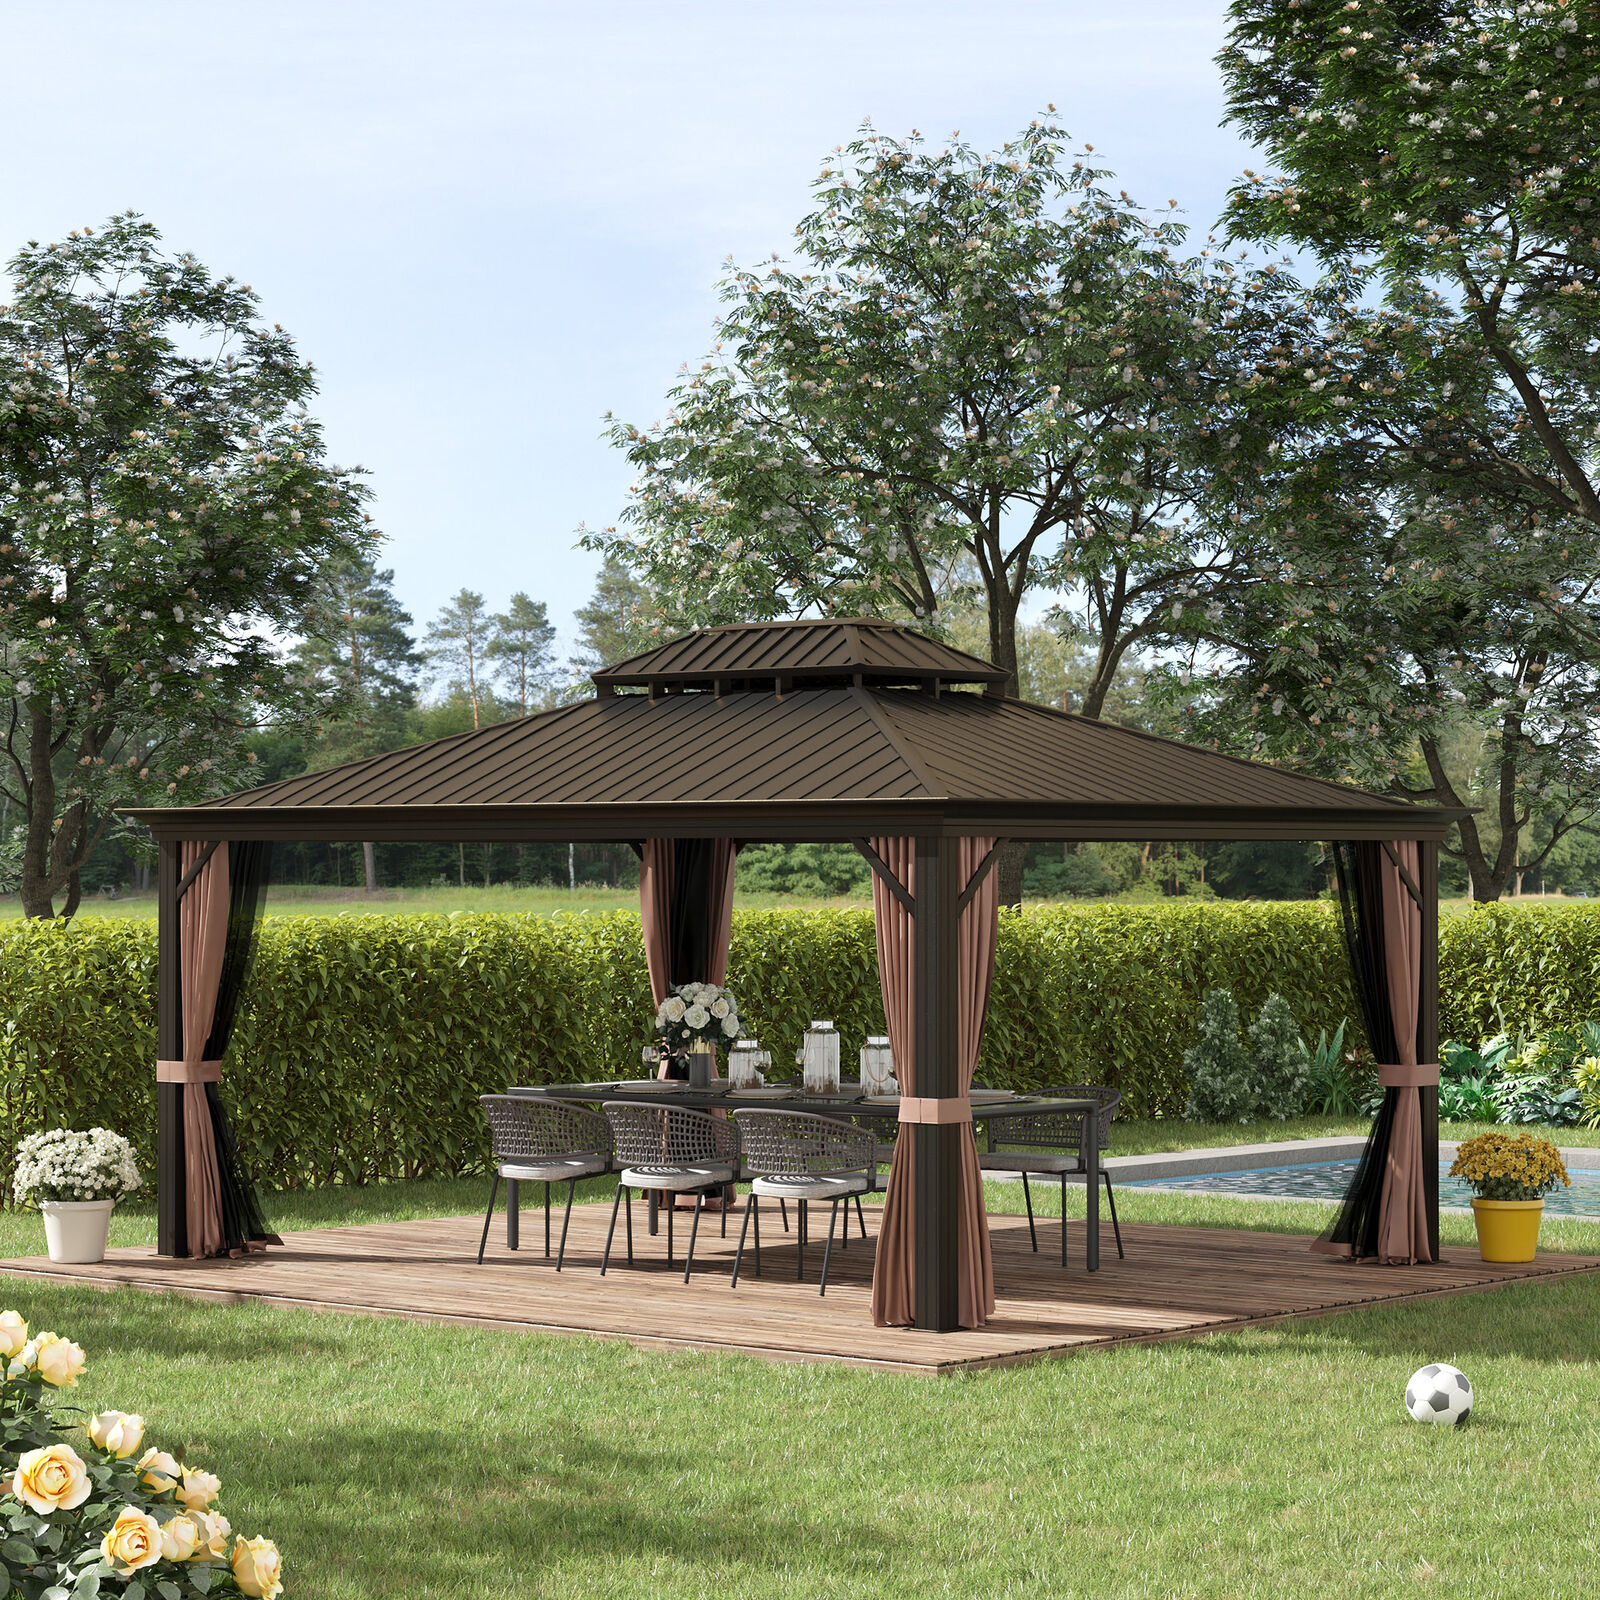 Outsunny 16' x 12' Aluminum Patio Gazebo w/ Mesh Curtains & Double Vented Steel Roof (Brown) $1402.49 + Free Shipping